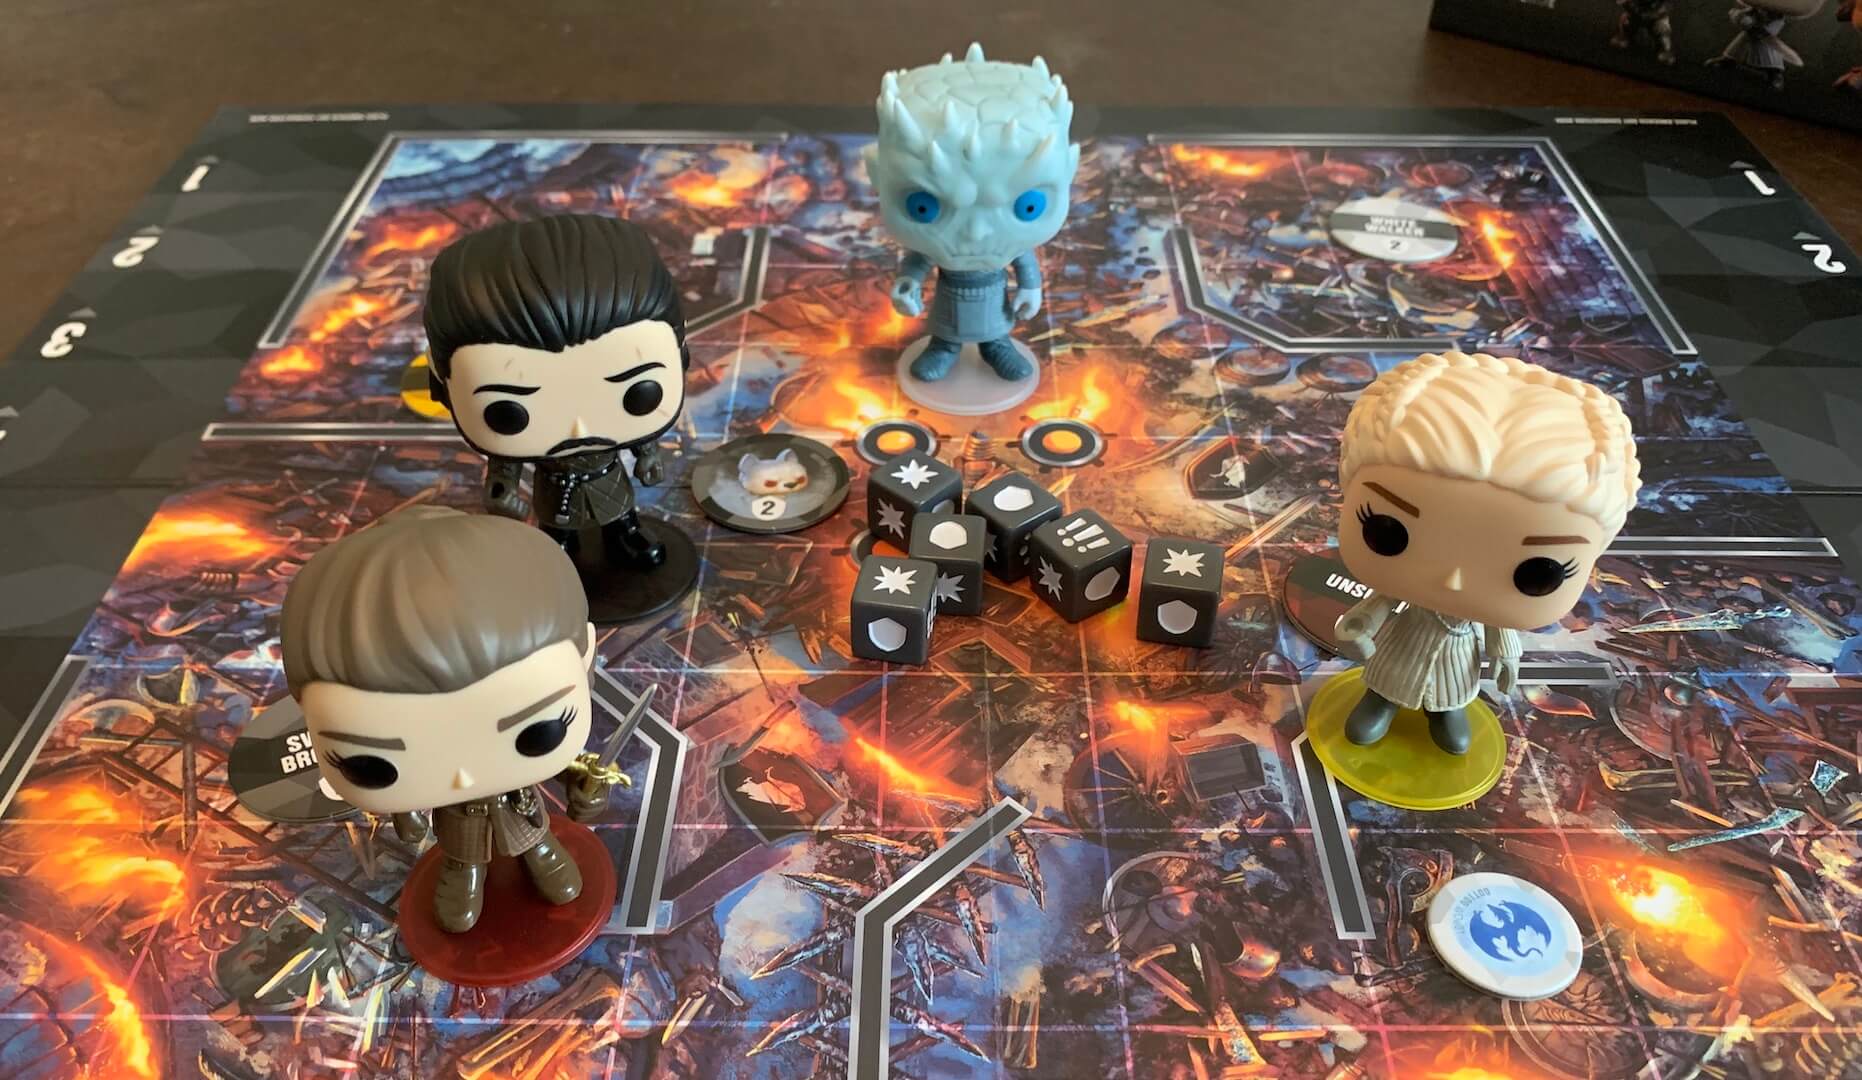 Funkoverse Game of Thrones Characters on the board